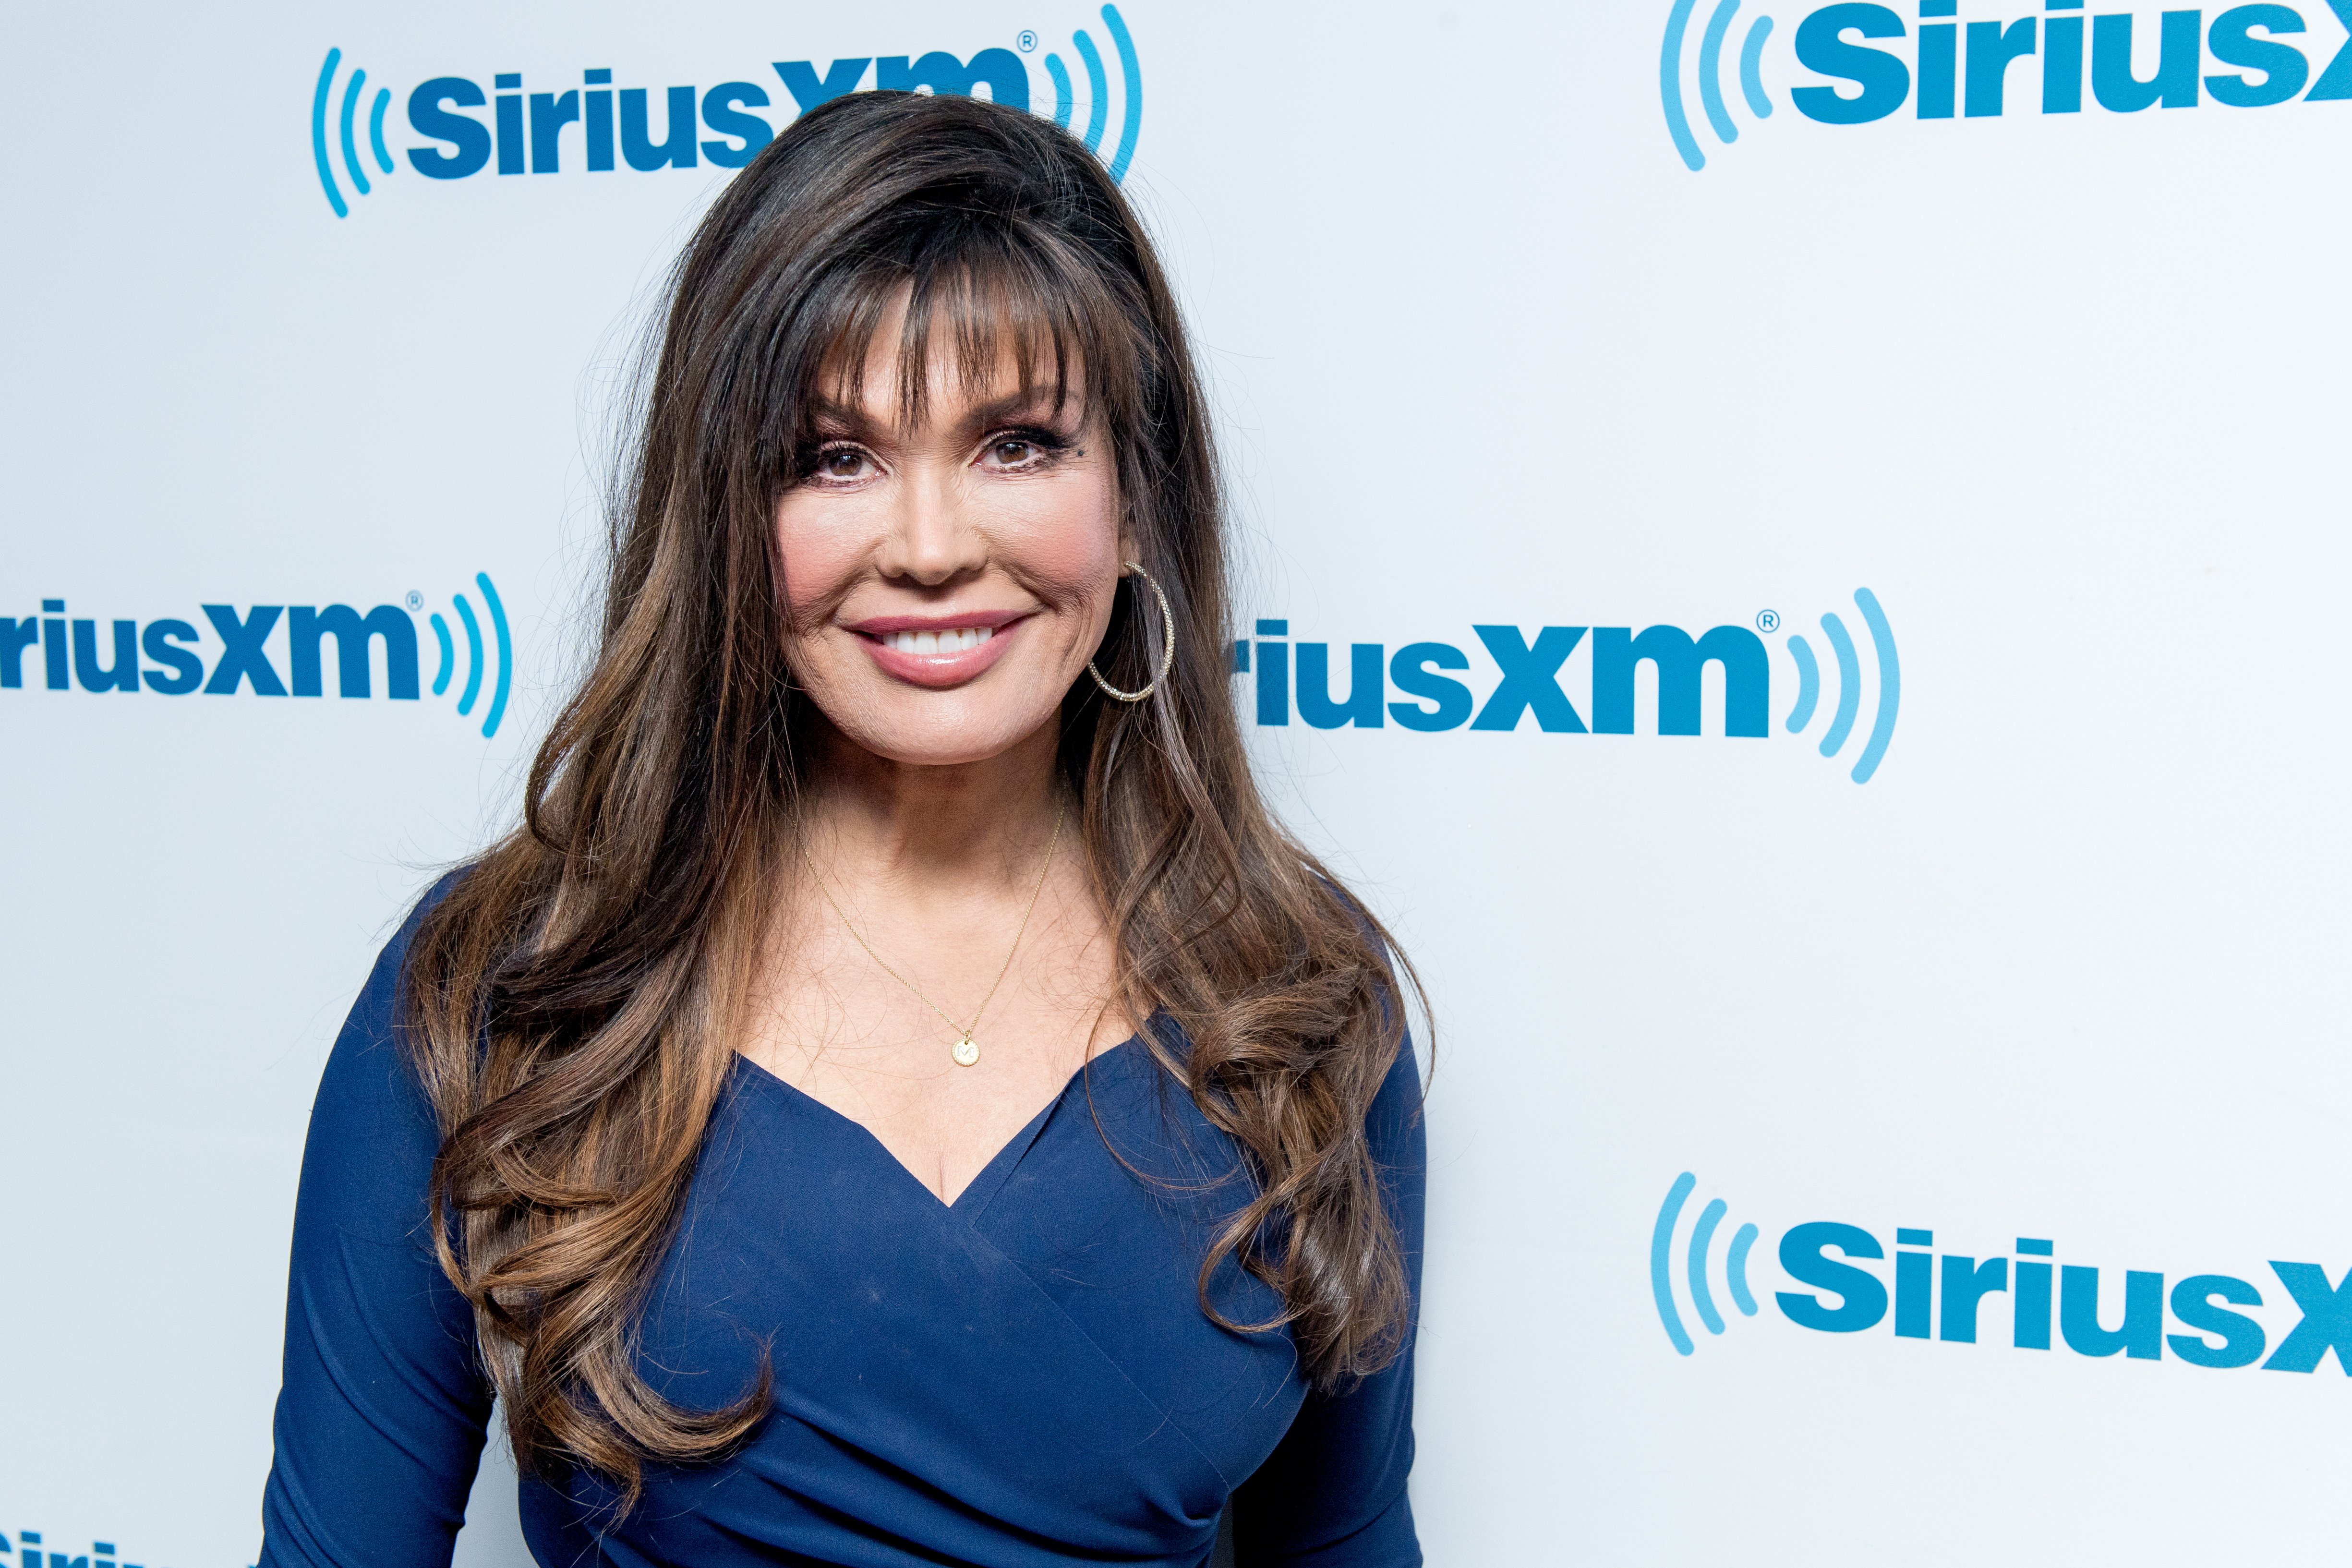 Marie Osmond pictured visiting the Andy Cohen show at SiriusXM Studios, January 2018 in New York City. | Photo: Getty Images